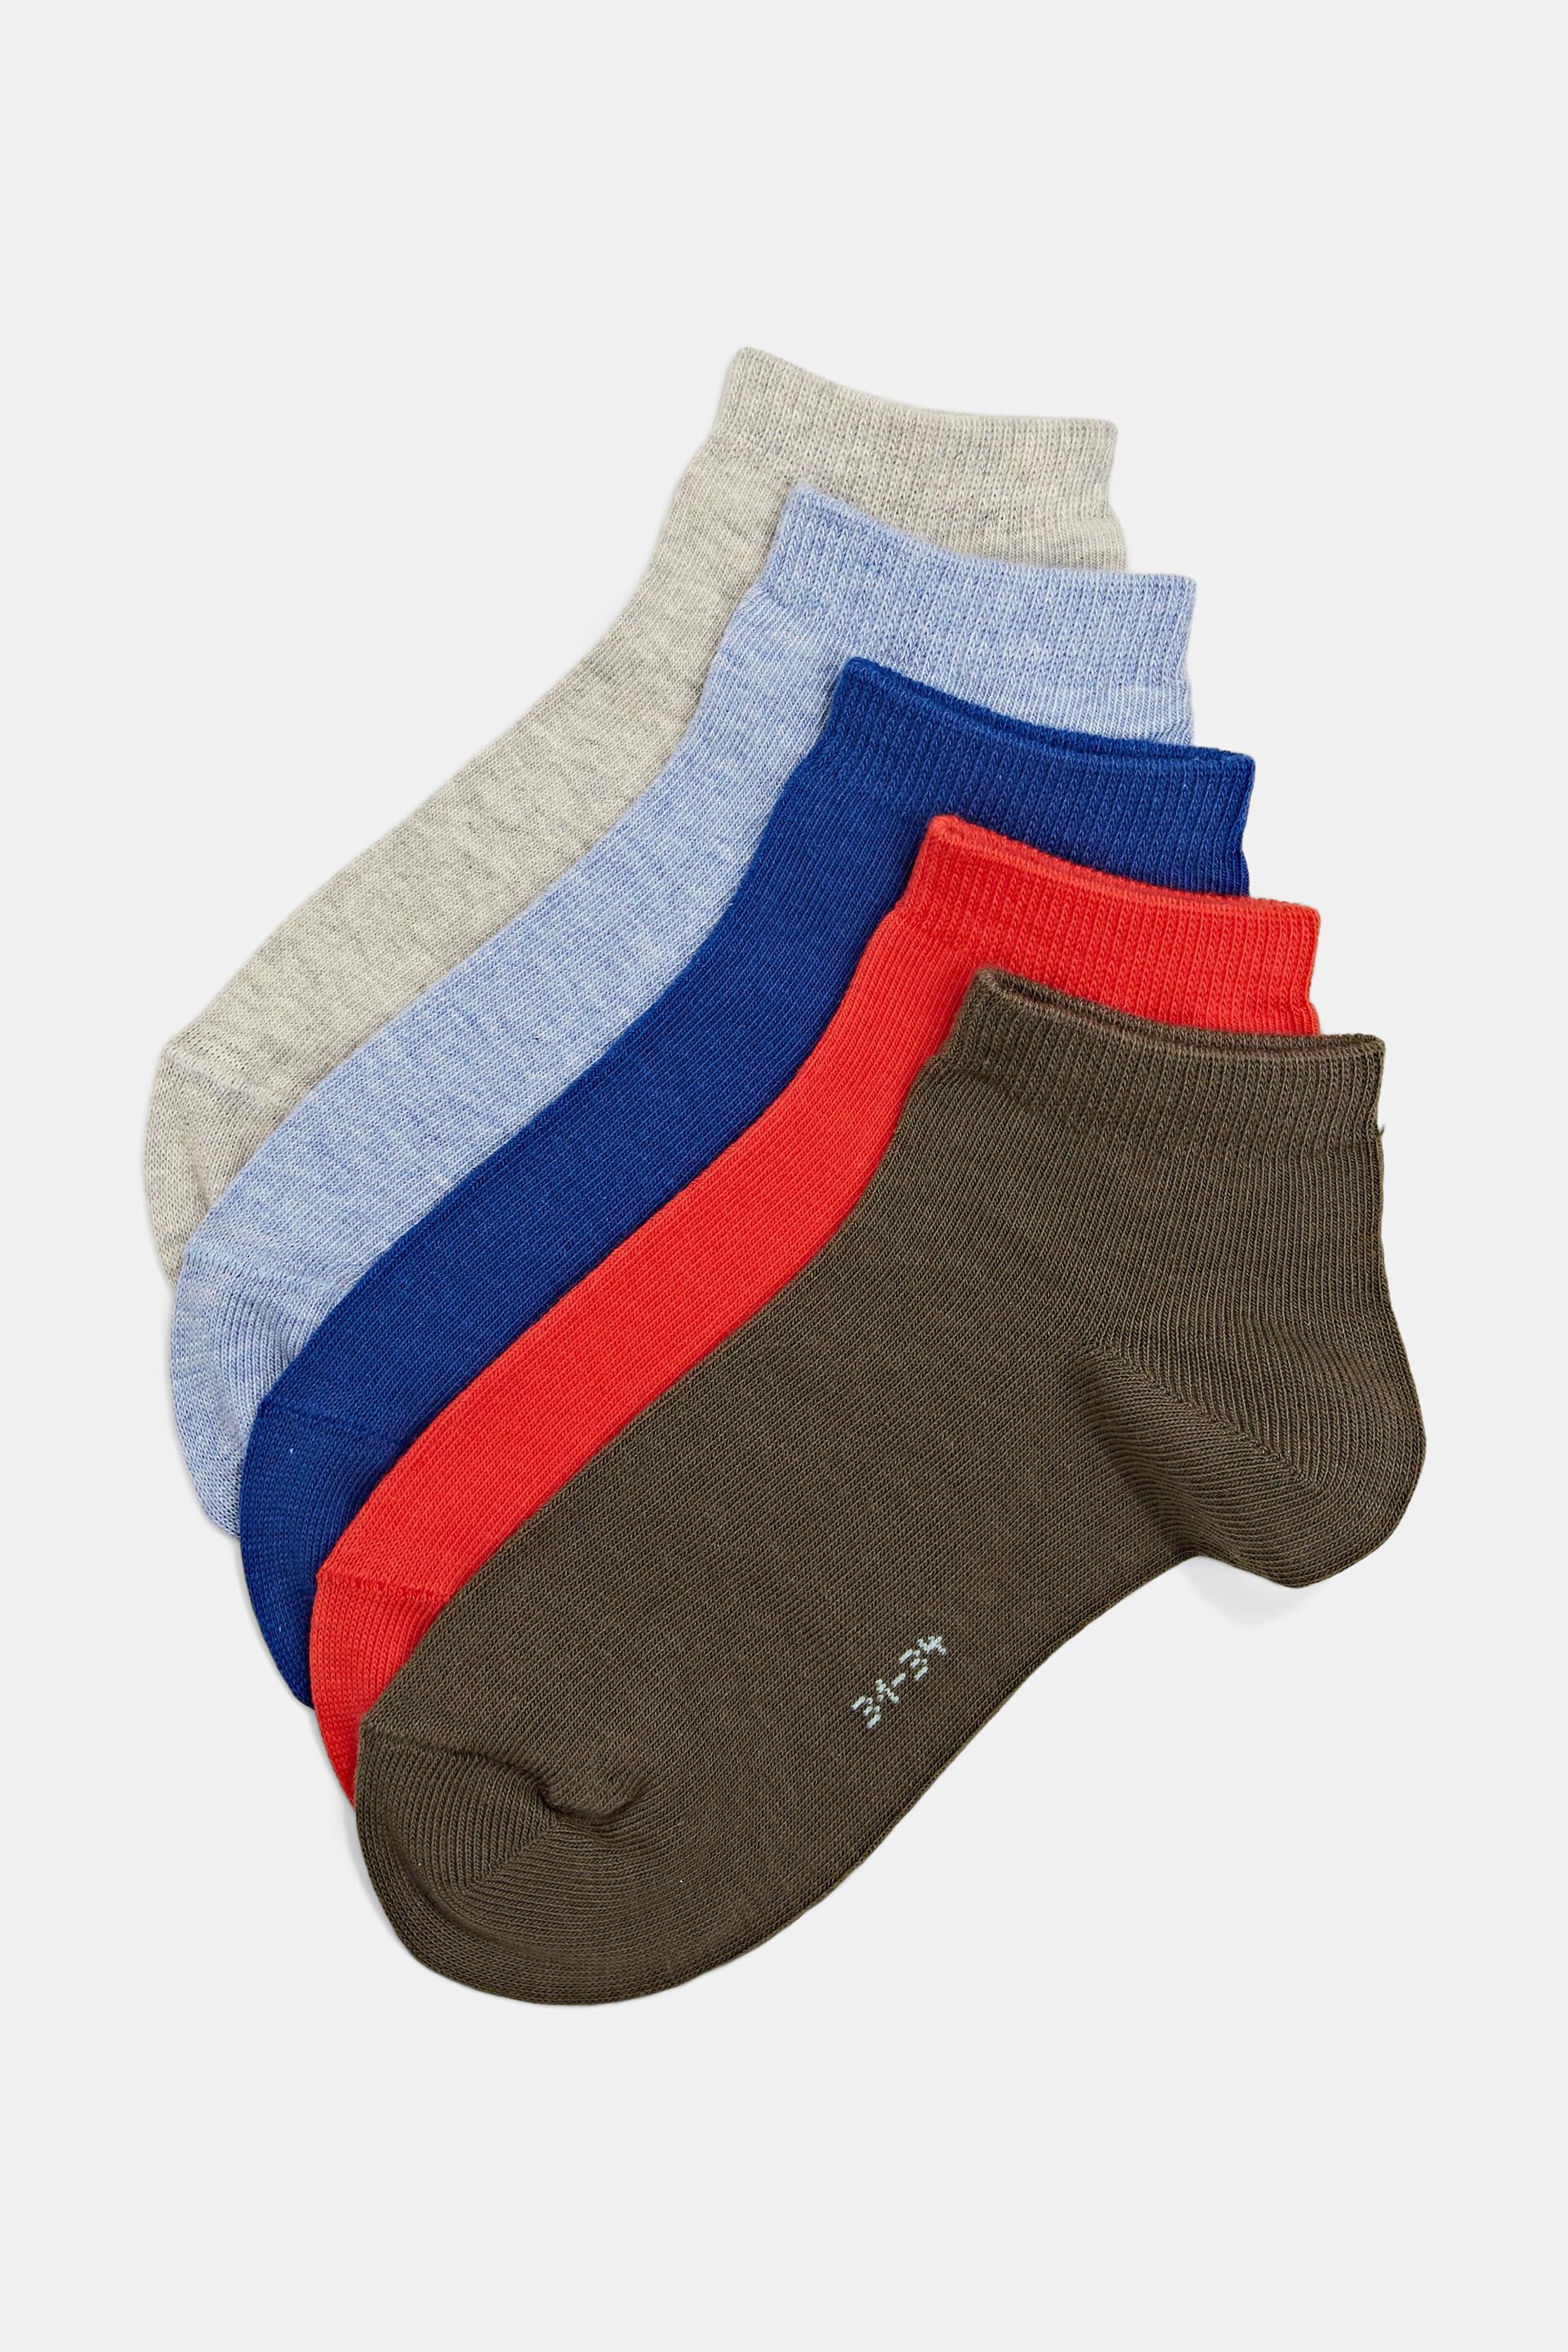 Esprit pairs plain-coloured 5 of socks, an Pack organic blend in cotton